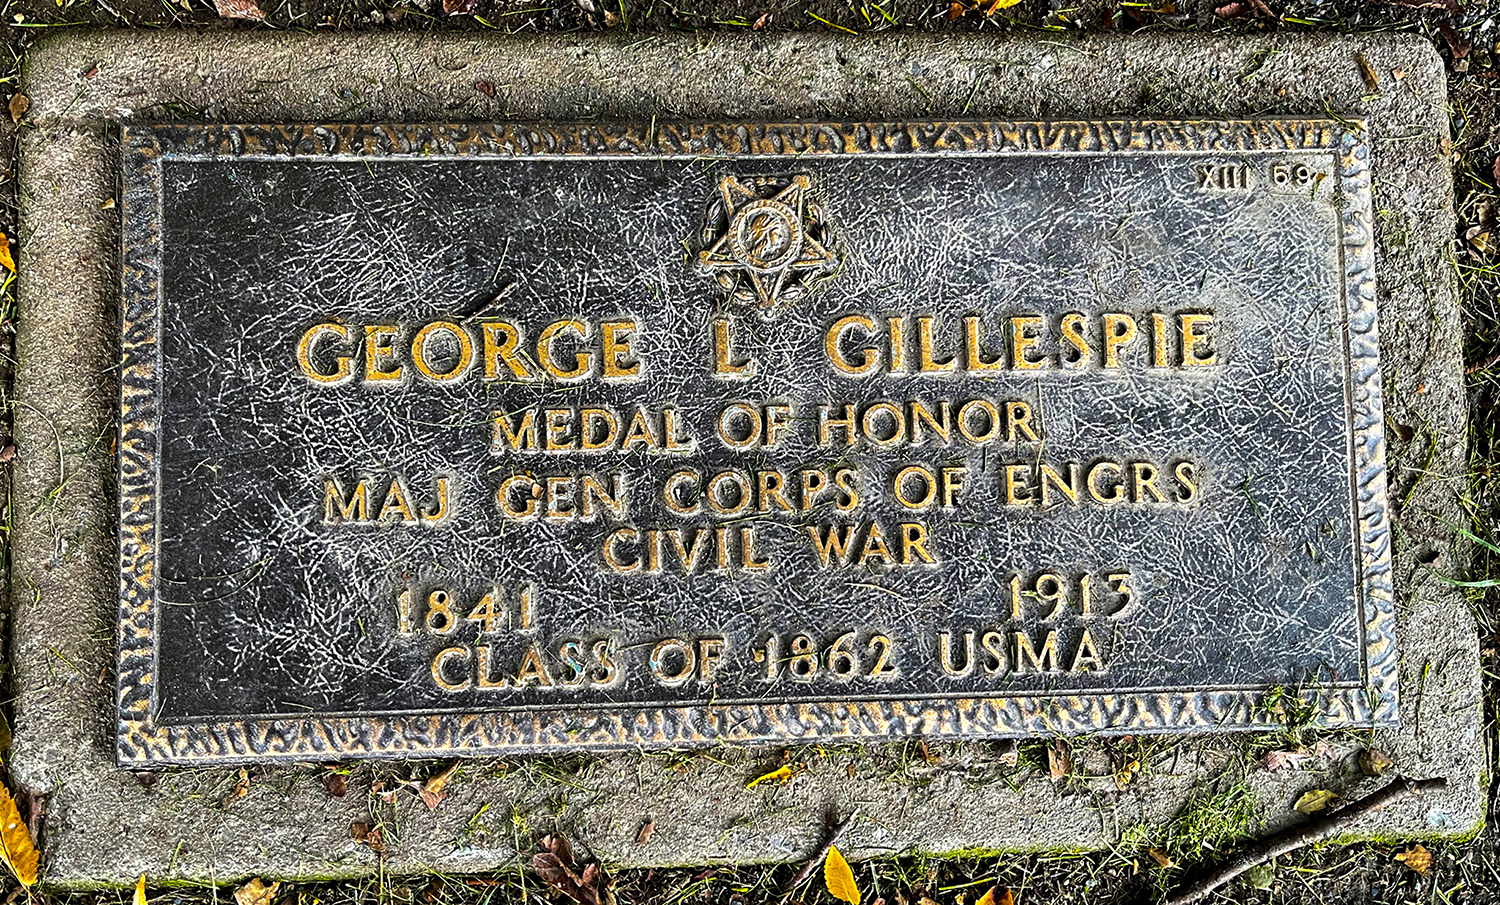 A simple, ground-level grave marker for George L. Gillespie, engraved on which is the five-pointed star design of the Medal of Honor.